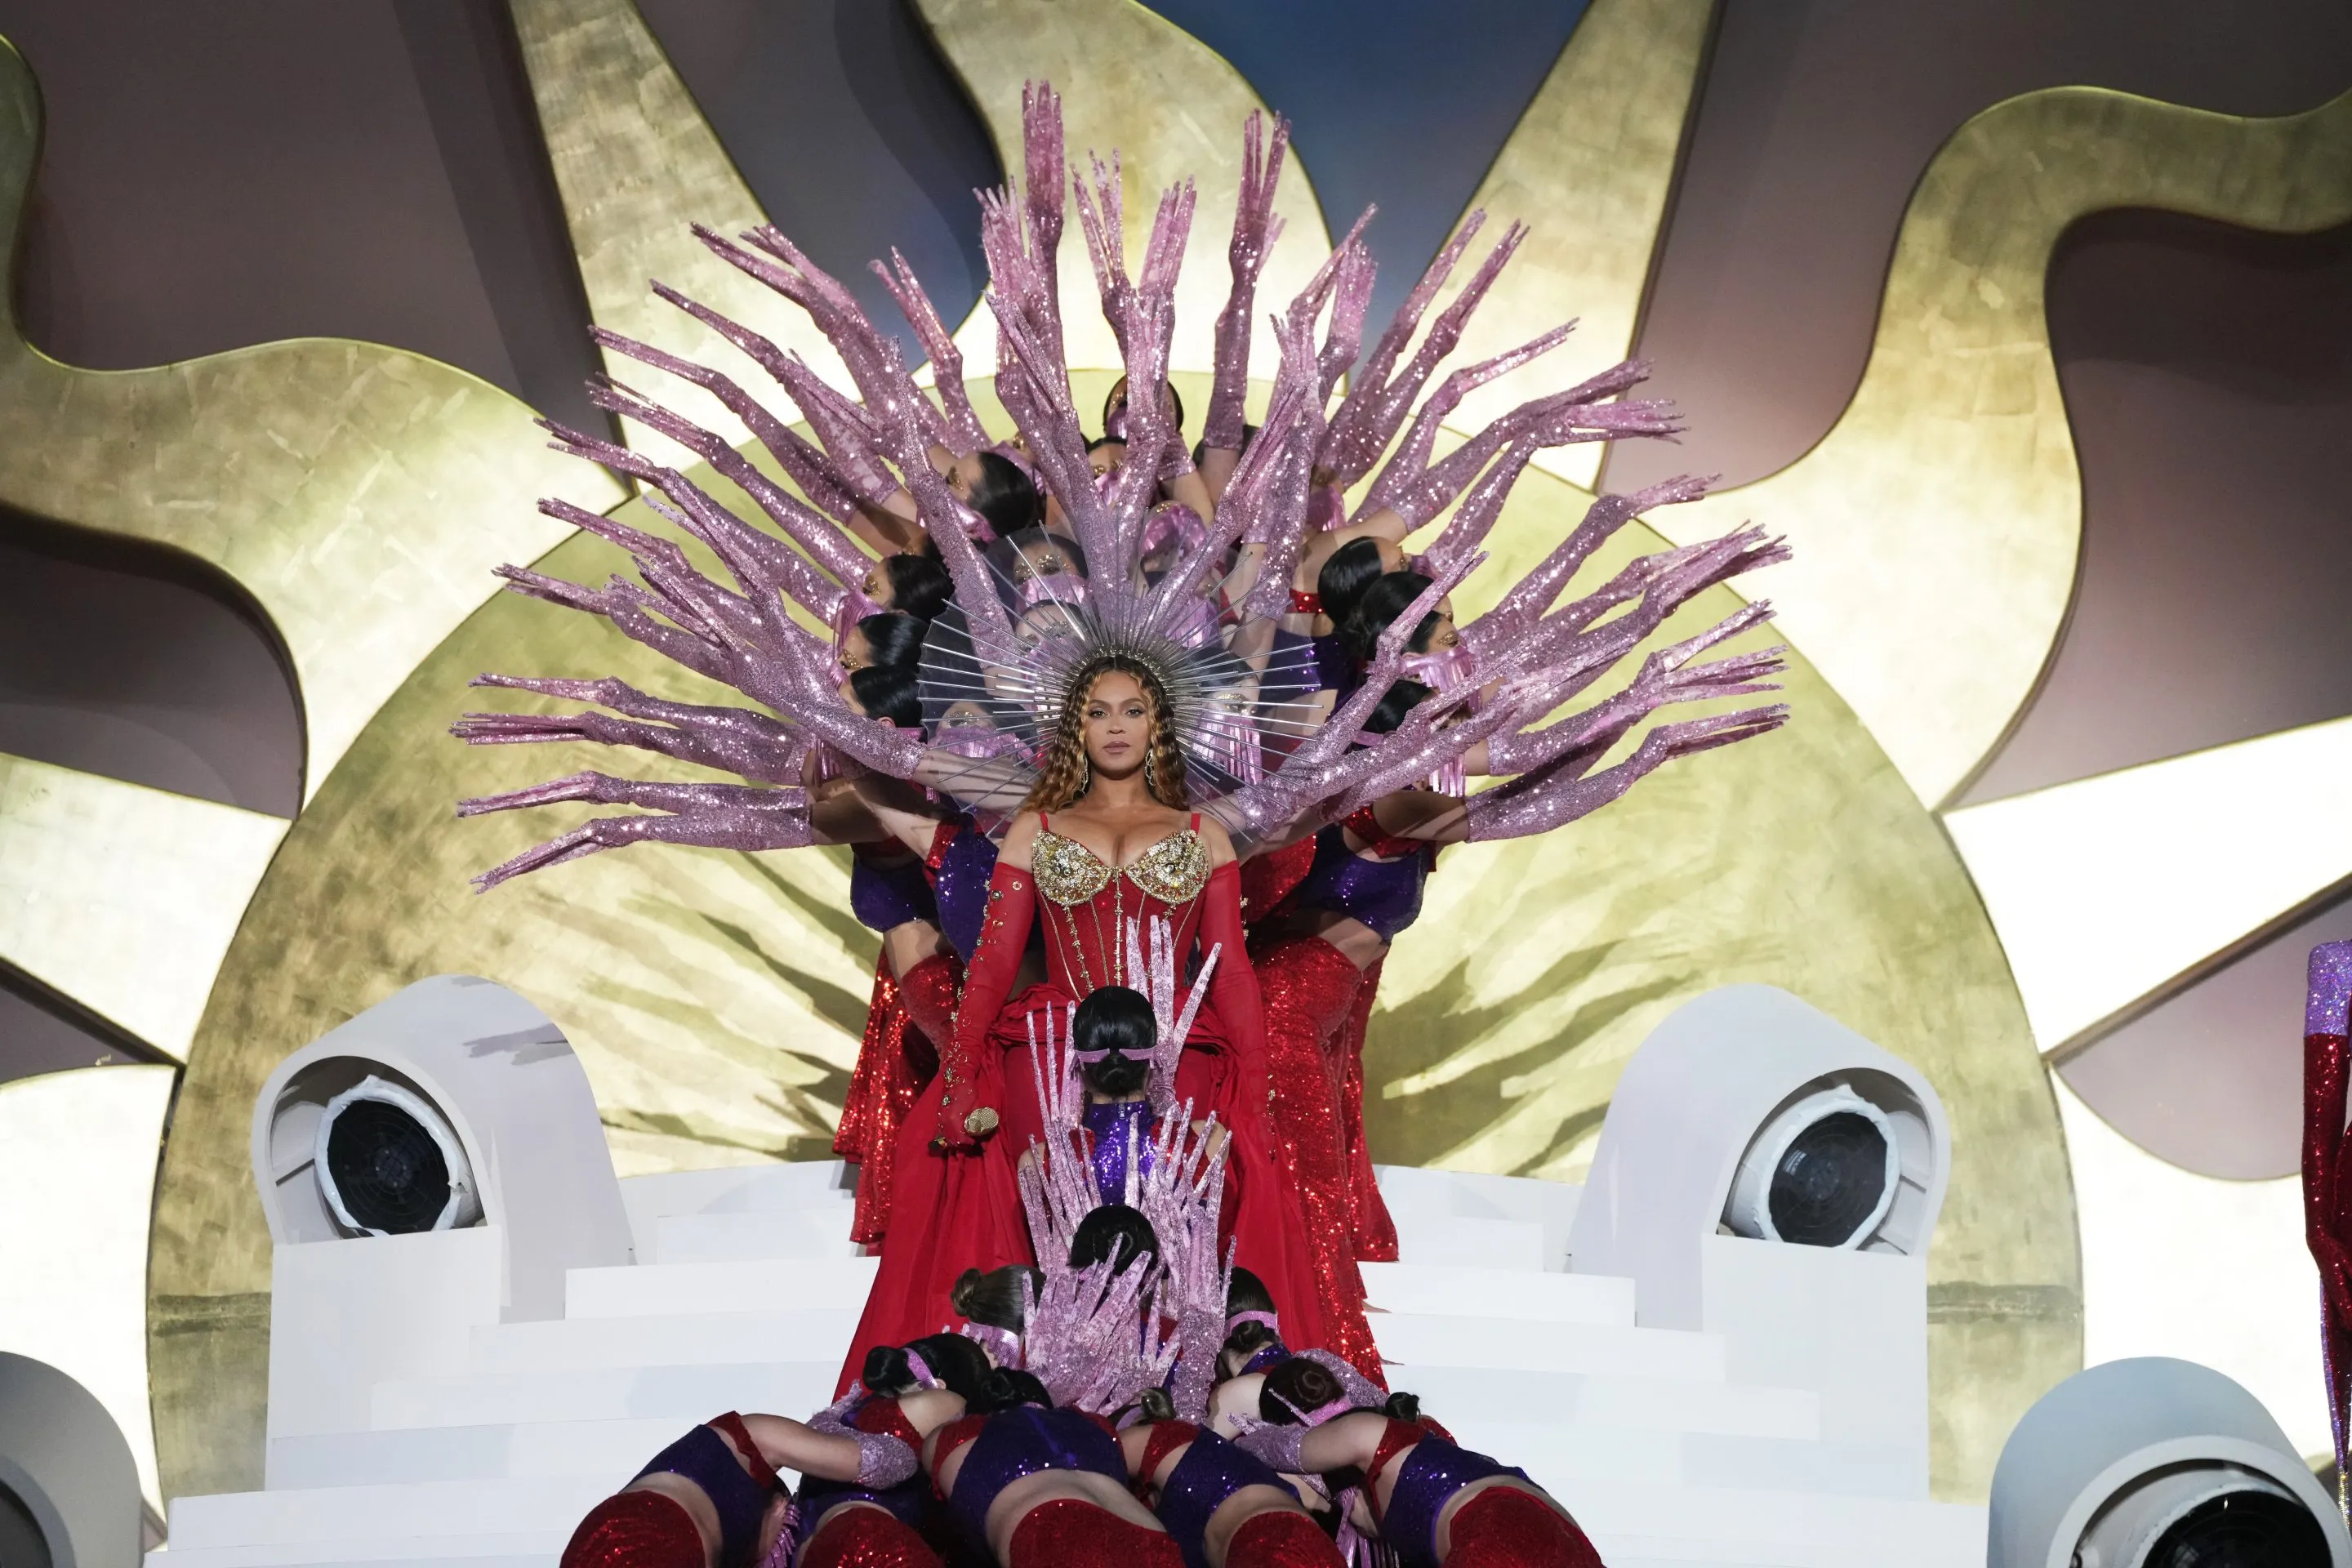 Beyoncé in an elaborate costume with a large, radiant headpiece, performing on a stage with an ornate design, evoking a regal and theatrical presence.